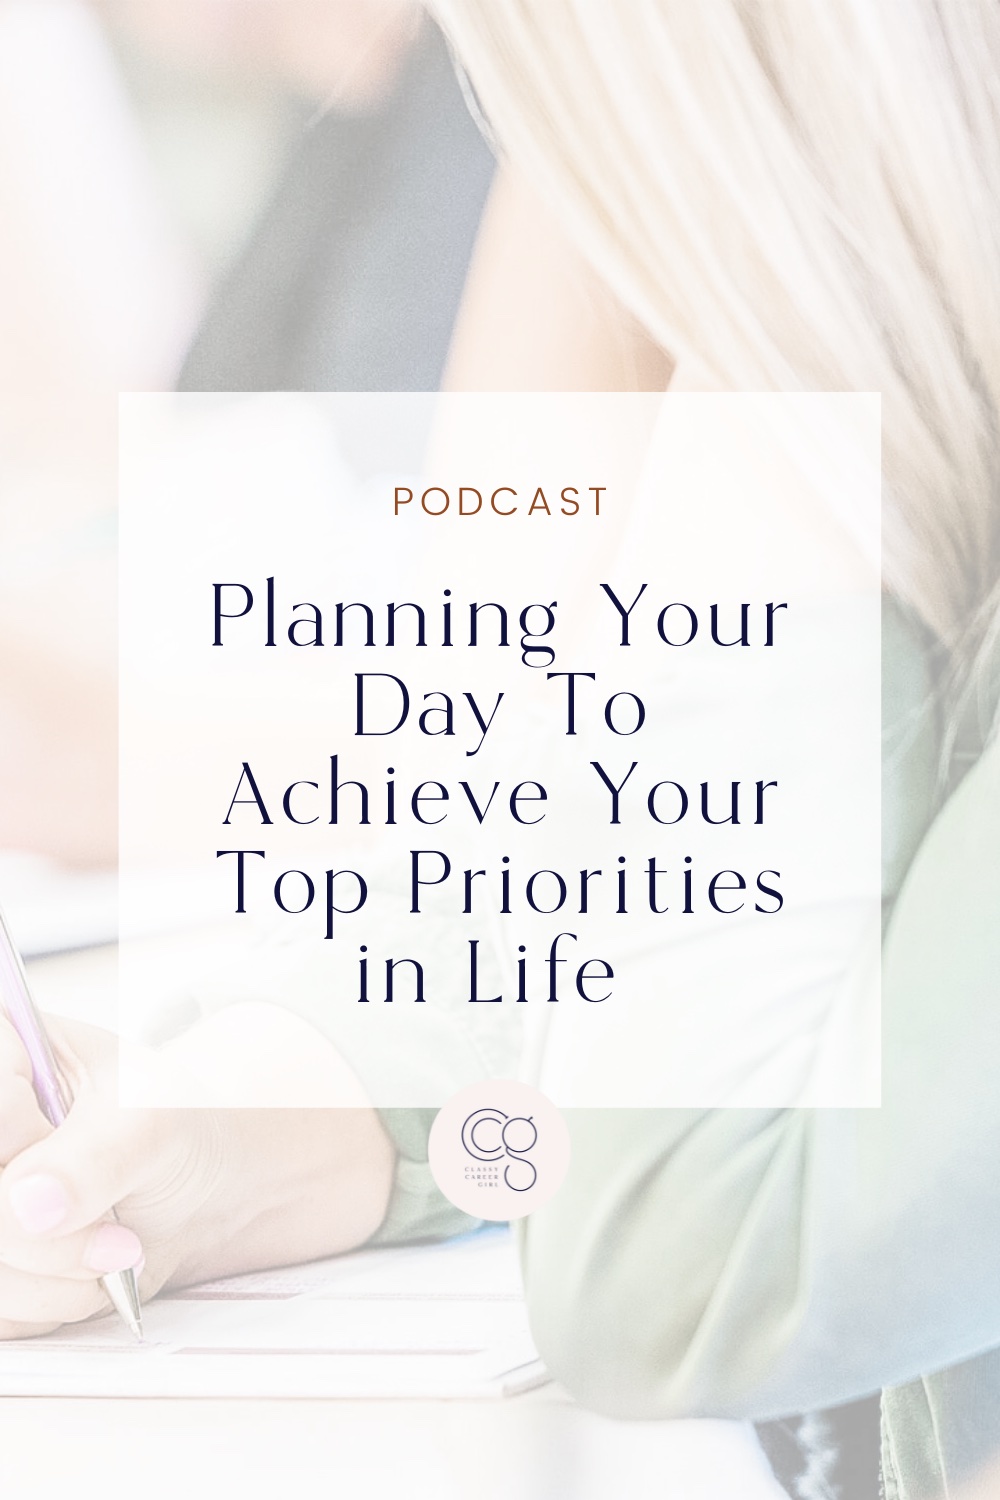 Podcast: Planning Your Day To Achieve Your Top Priorities in Life